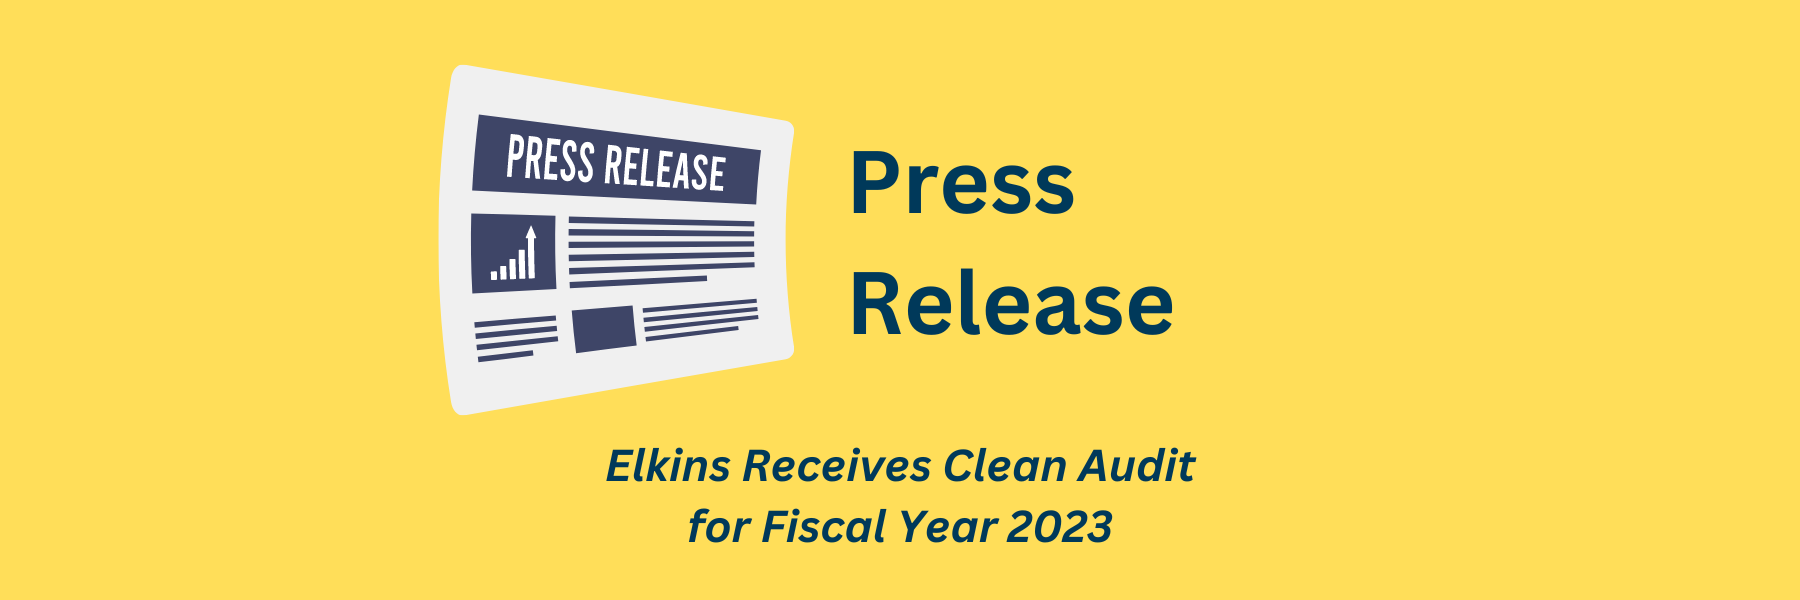 Elkins Receives Clean Audit for Fiscal Year 2023